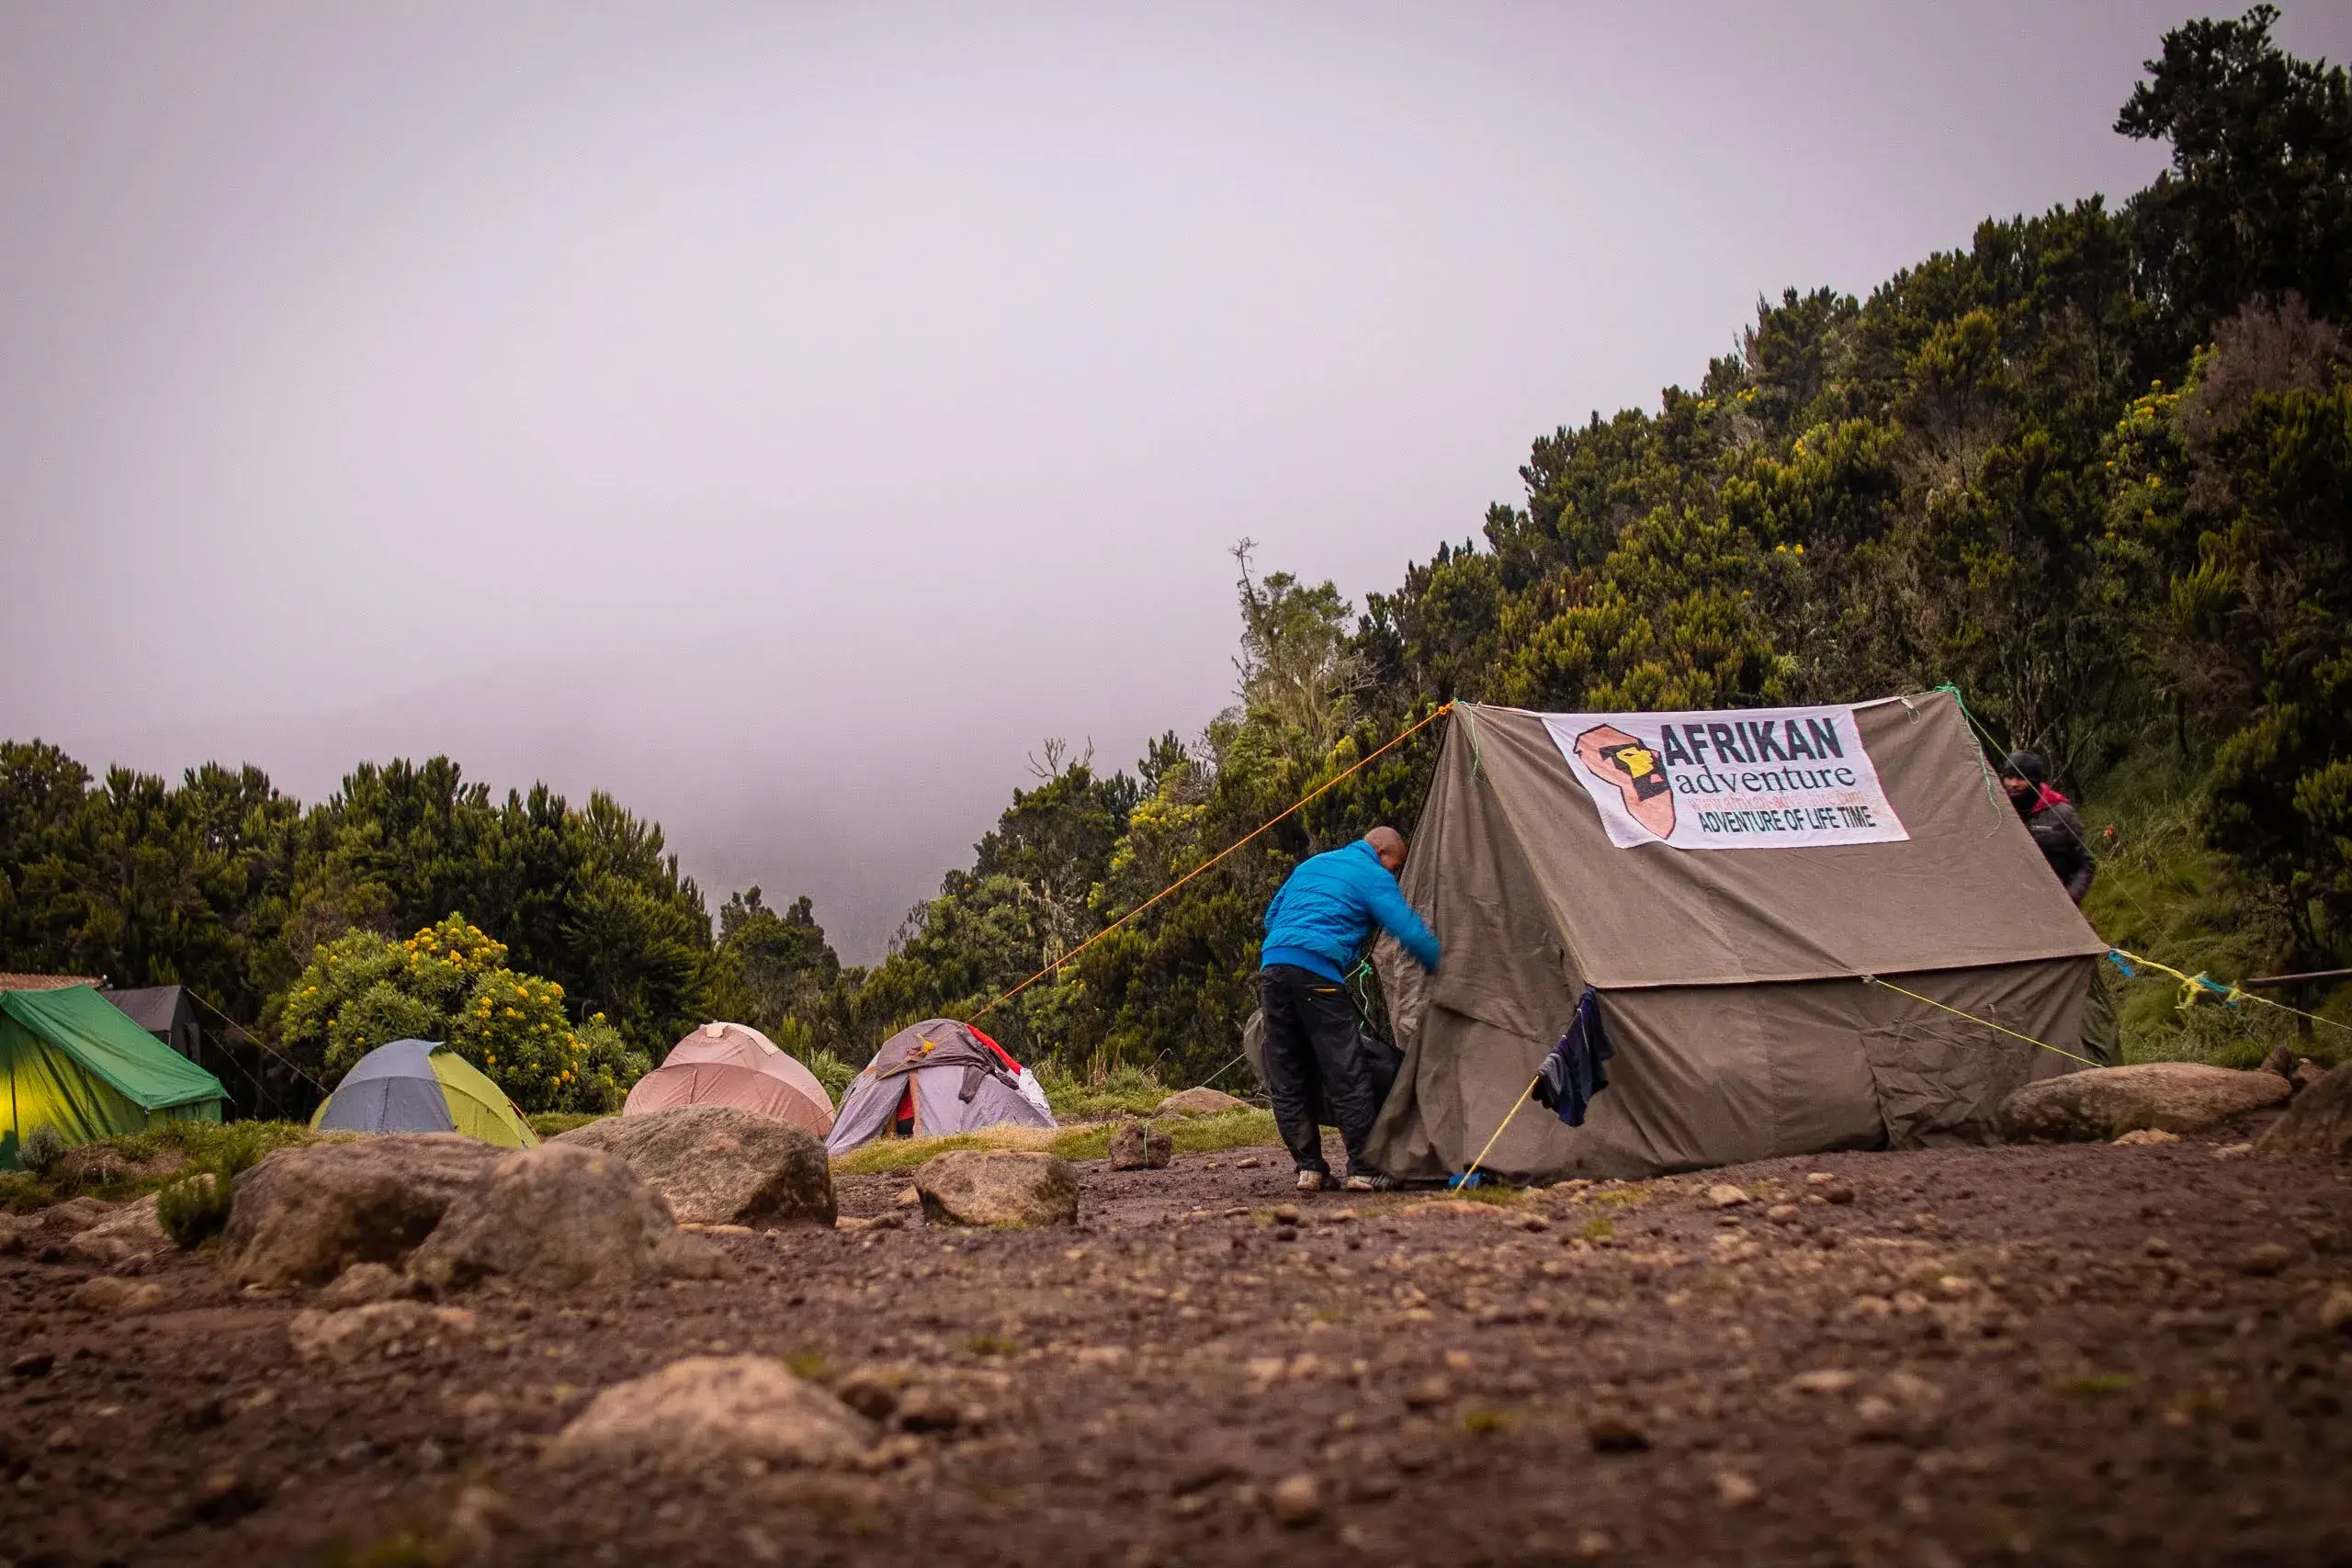 Early morning view of Camping tents of afrikan adventures in treks.